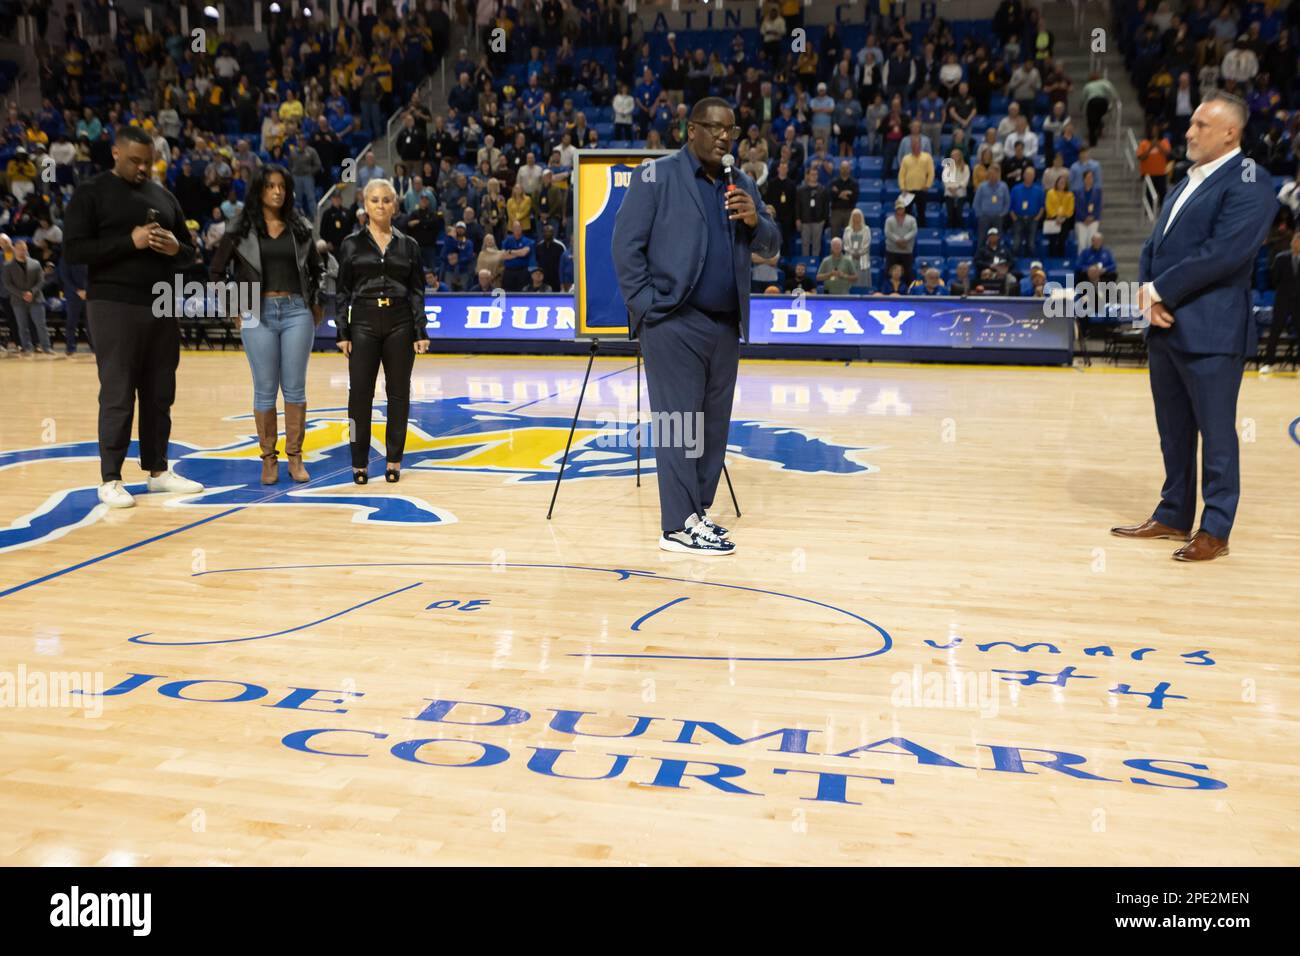 McNeese State University names the court after Cowboy great and NBA Hall of Fame member Joe Dumars, Thursday, Jan. 5, 2023, in Lake Charles, Louisiana Stock Photo